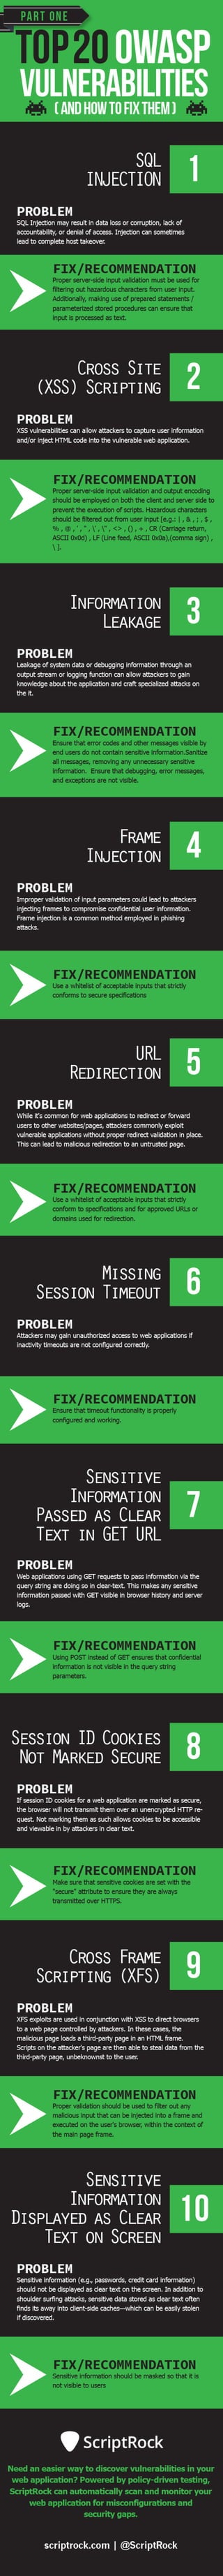 Top 20 OWASP vulnerabilities & how to fix them - Infographic 